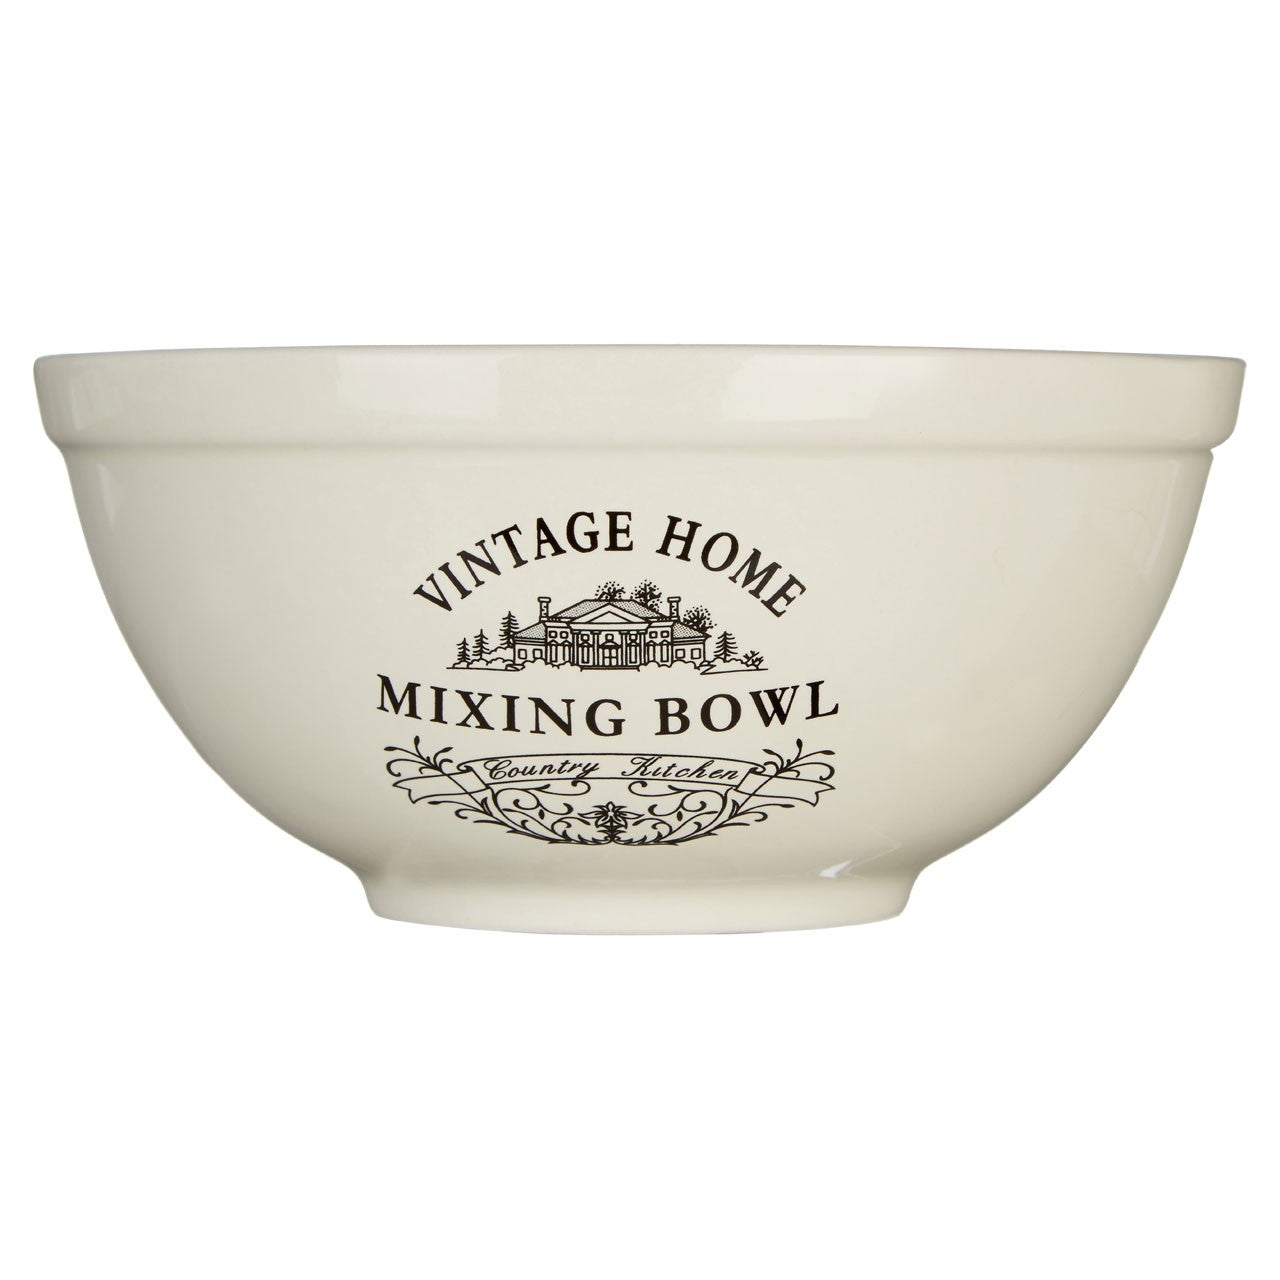 Vintage Home Mixing Bowl